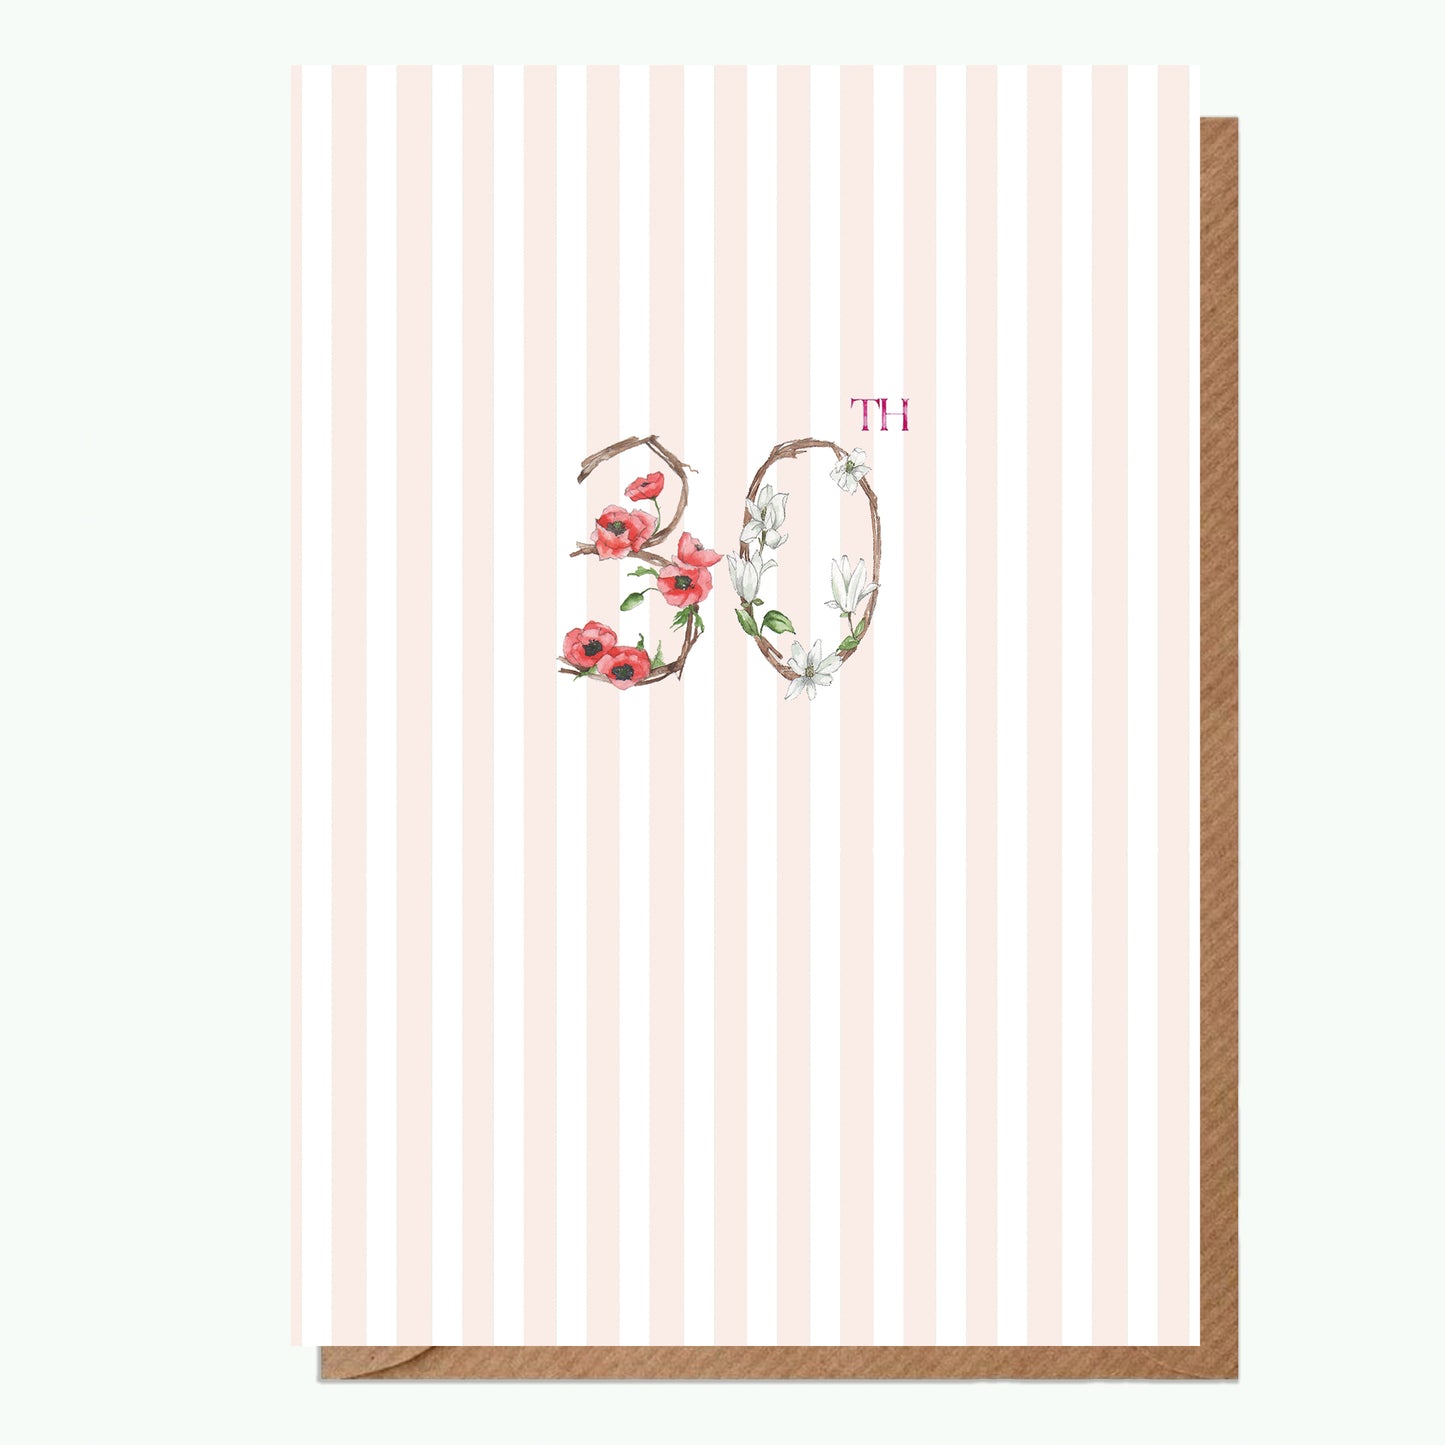 A6 Greeting Card with Ceramic Keepsake - 30th Greeting & Note Cards Crumble and Core   